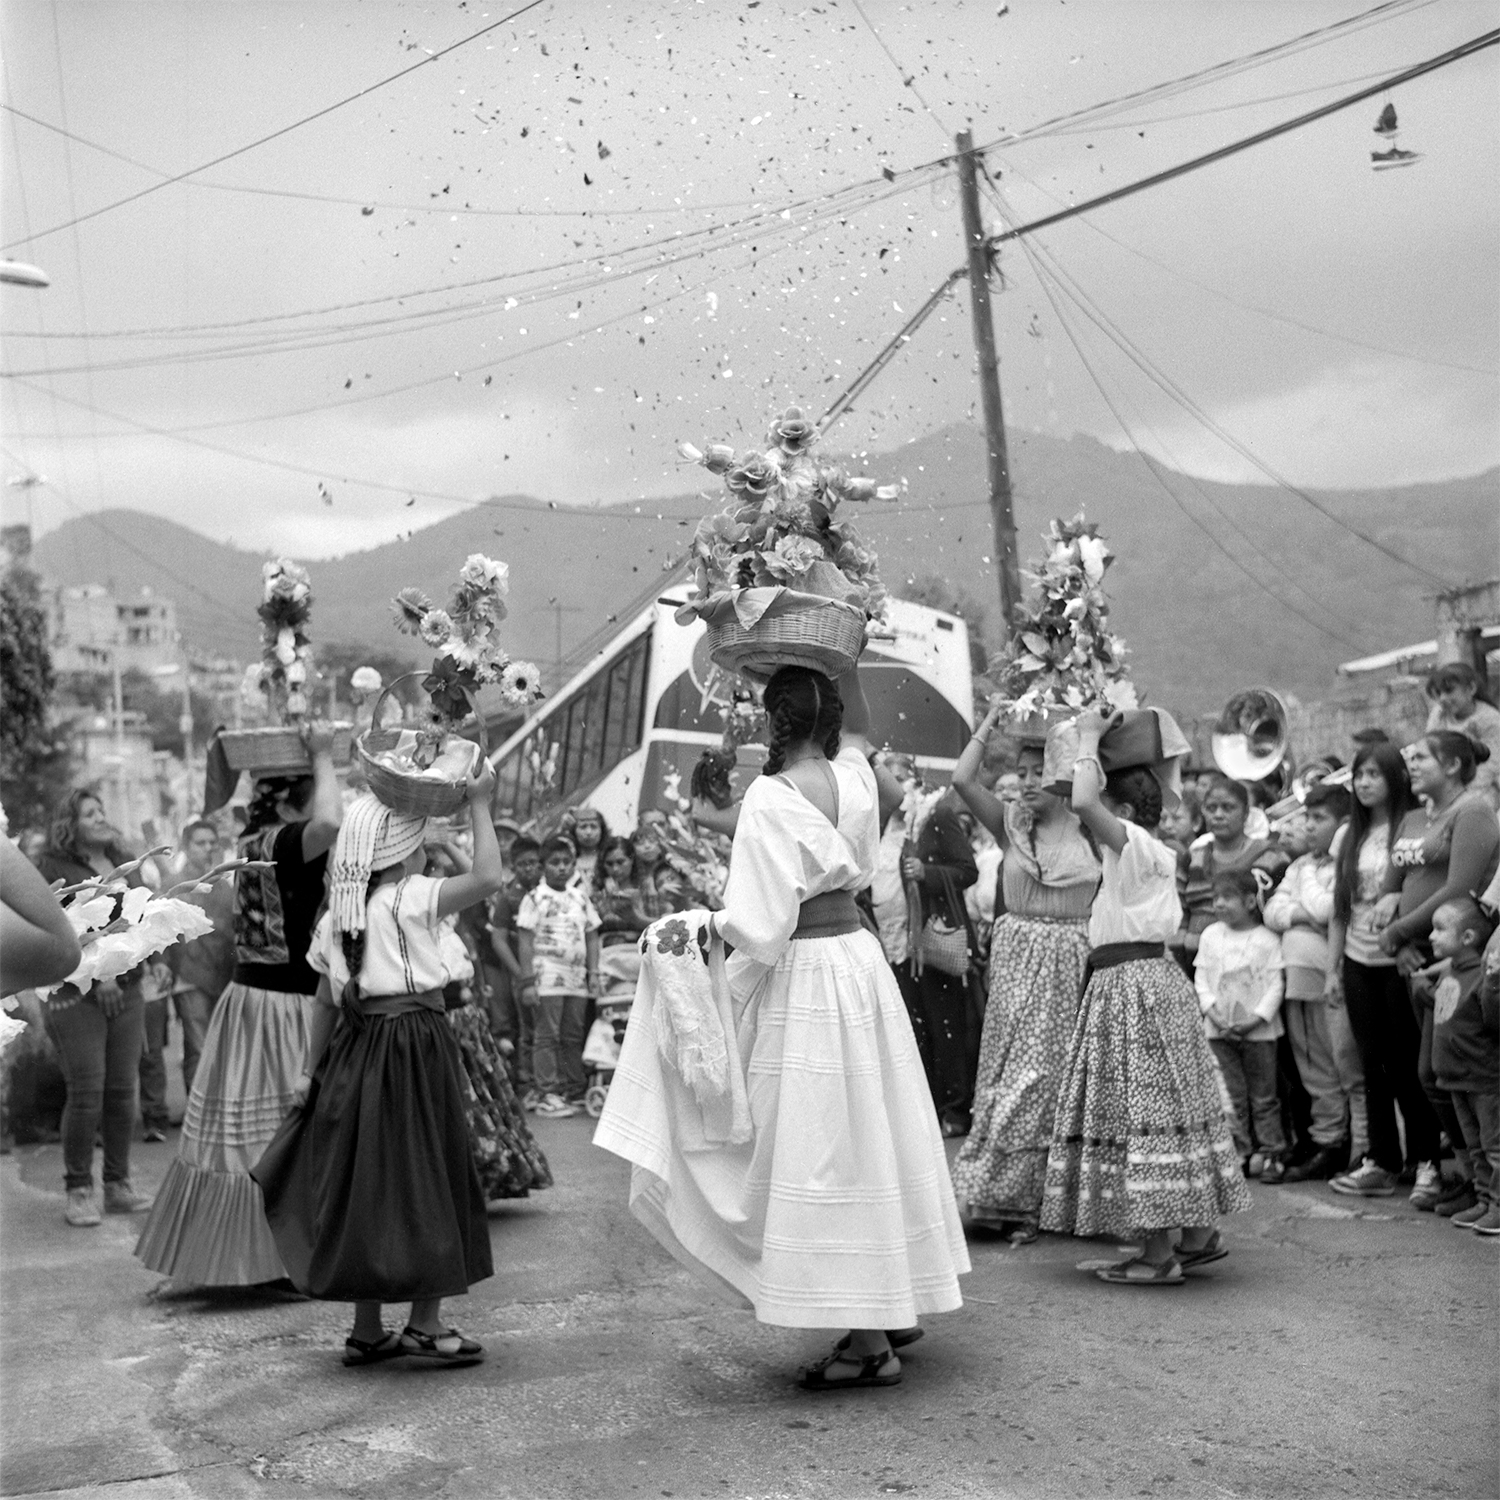 A group of girls dancing el Jarabe del Valle, Cuautepec, Mexico City, from the 